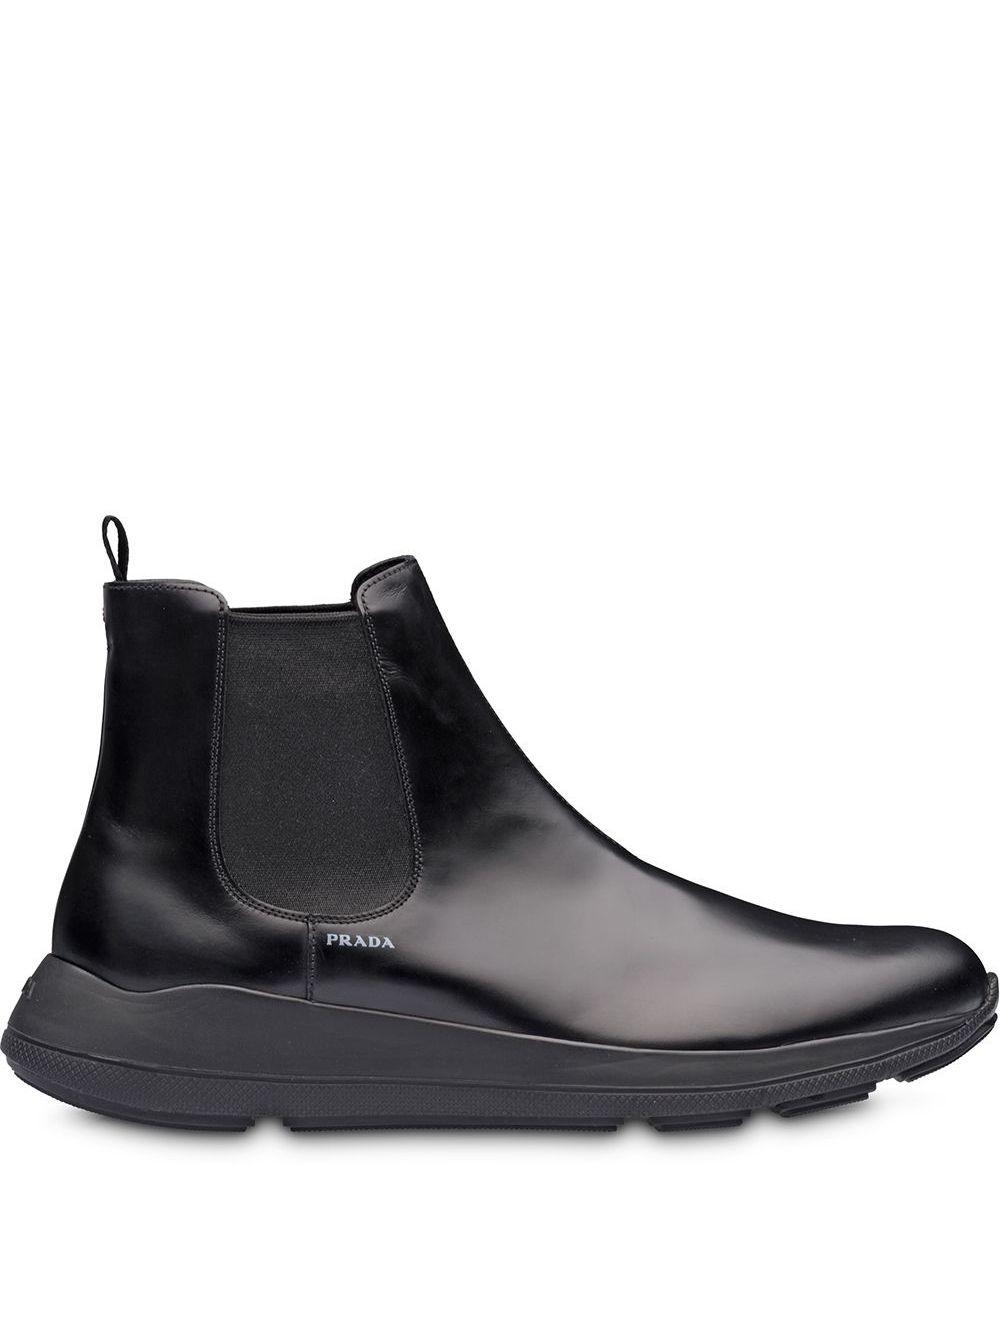 Prada Brushed Leather Booties in Black for Men - Lyst